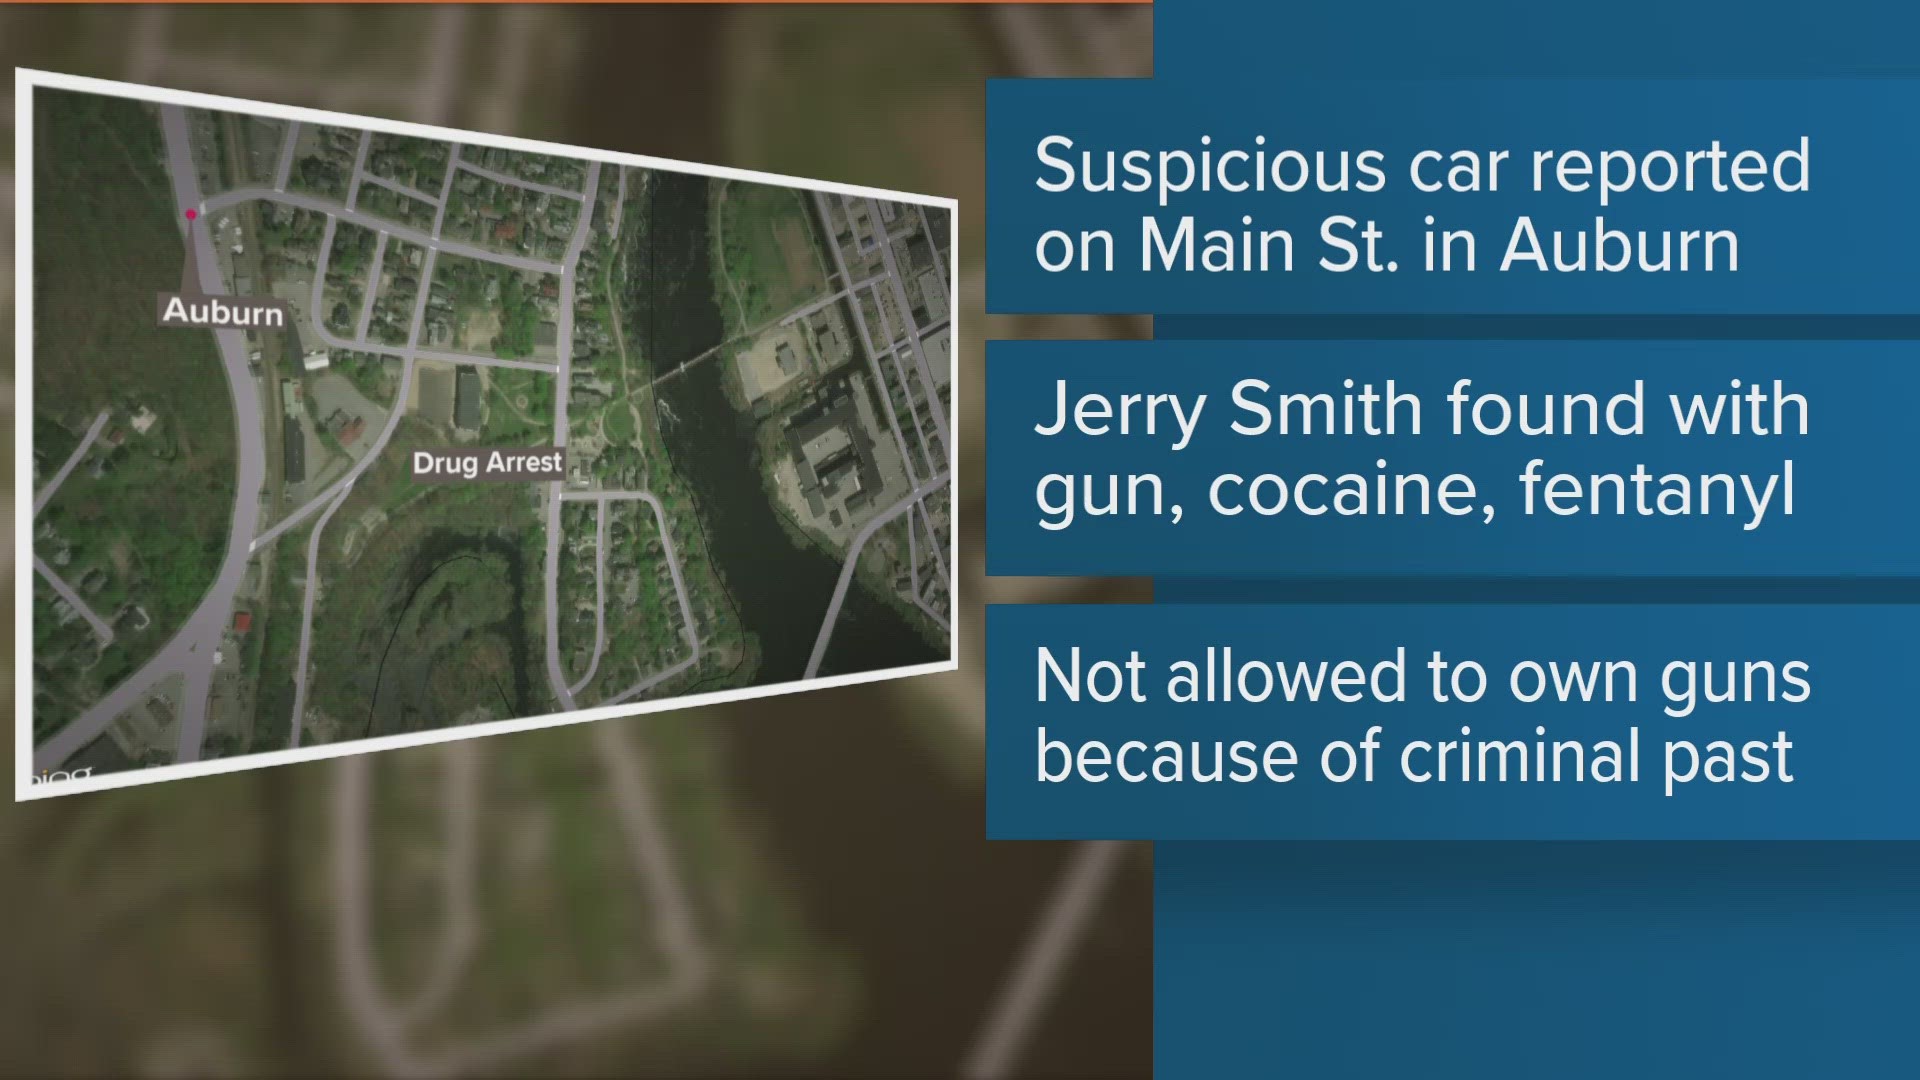 Jerry Smith is reportedly not allowed to be in possession of guns due to his criminal history. Suspected cocaine and fentanyl also were found in his car.